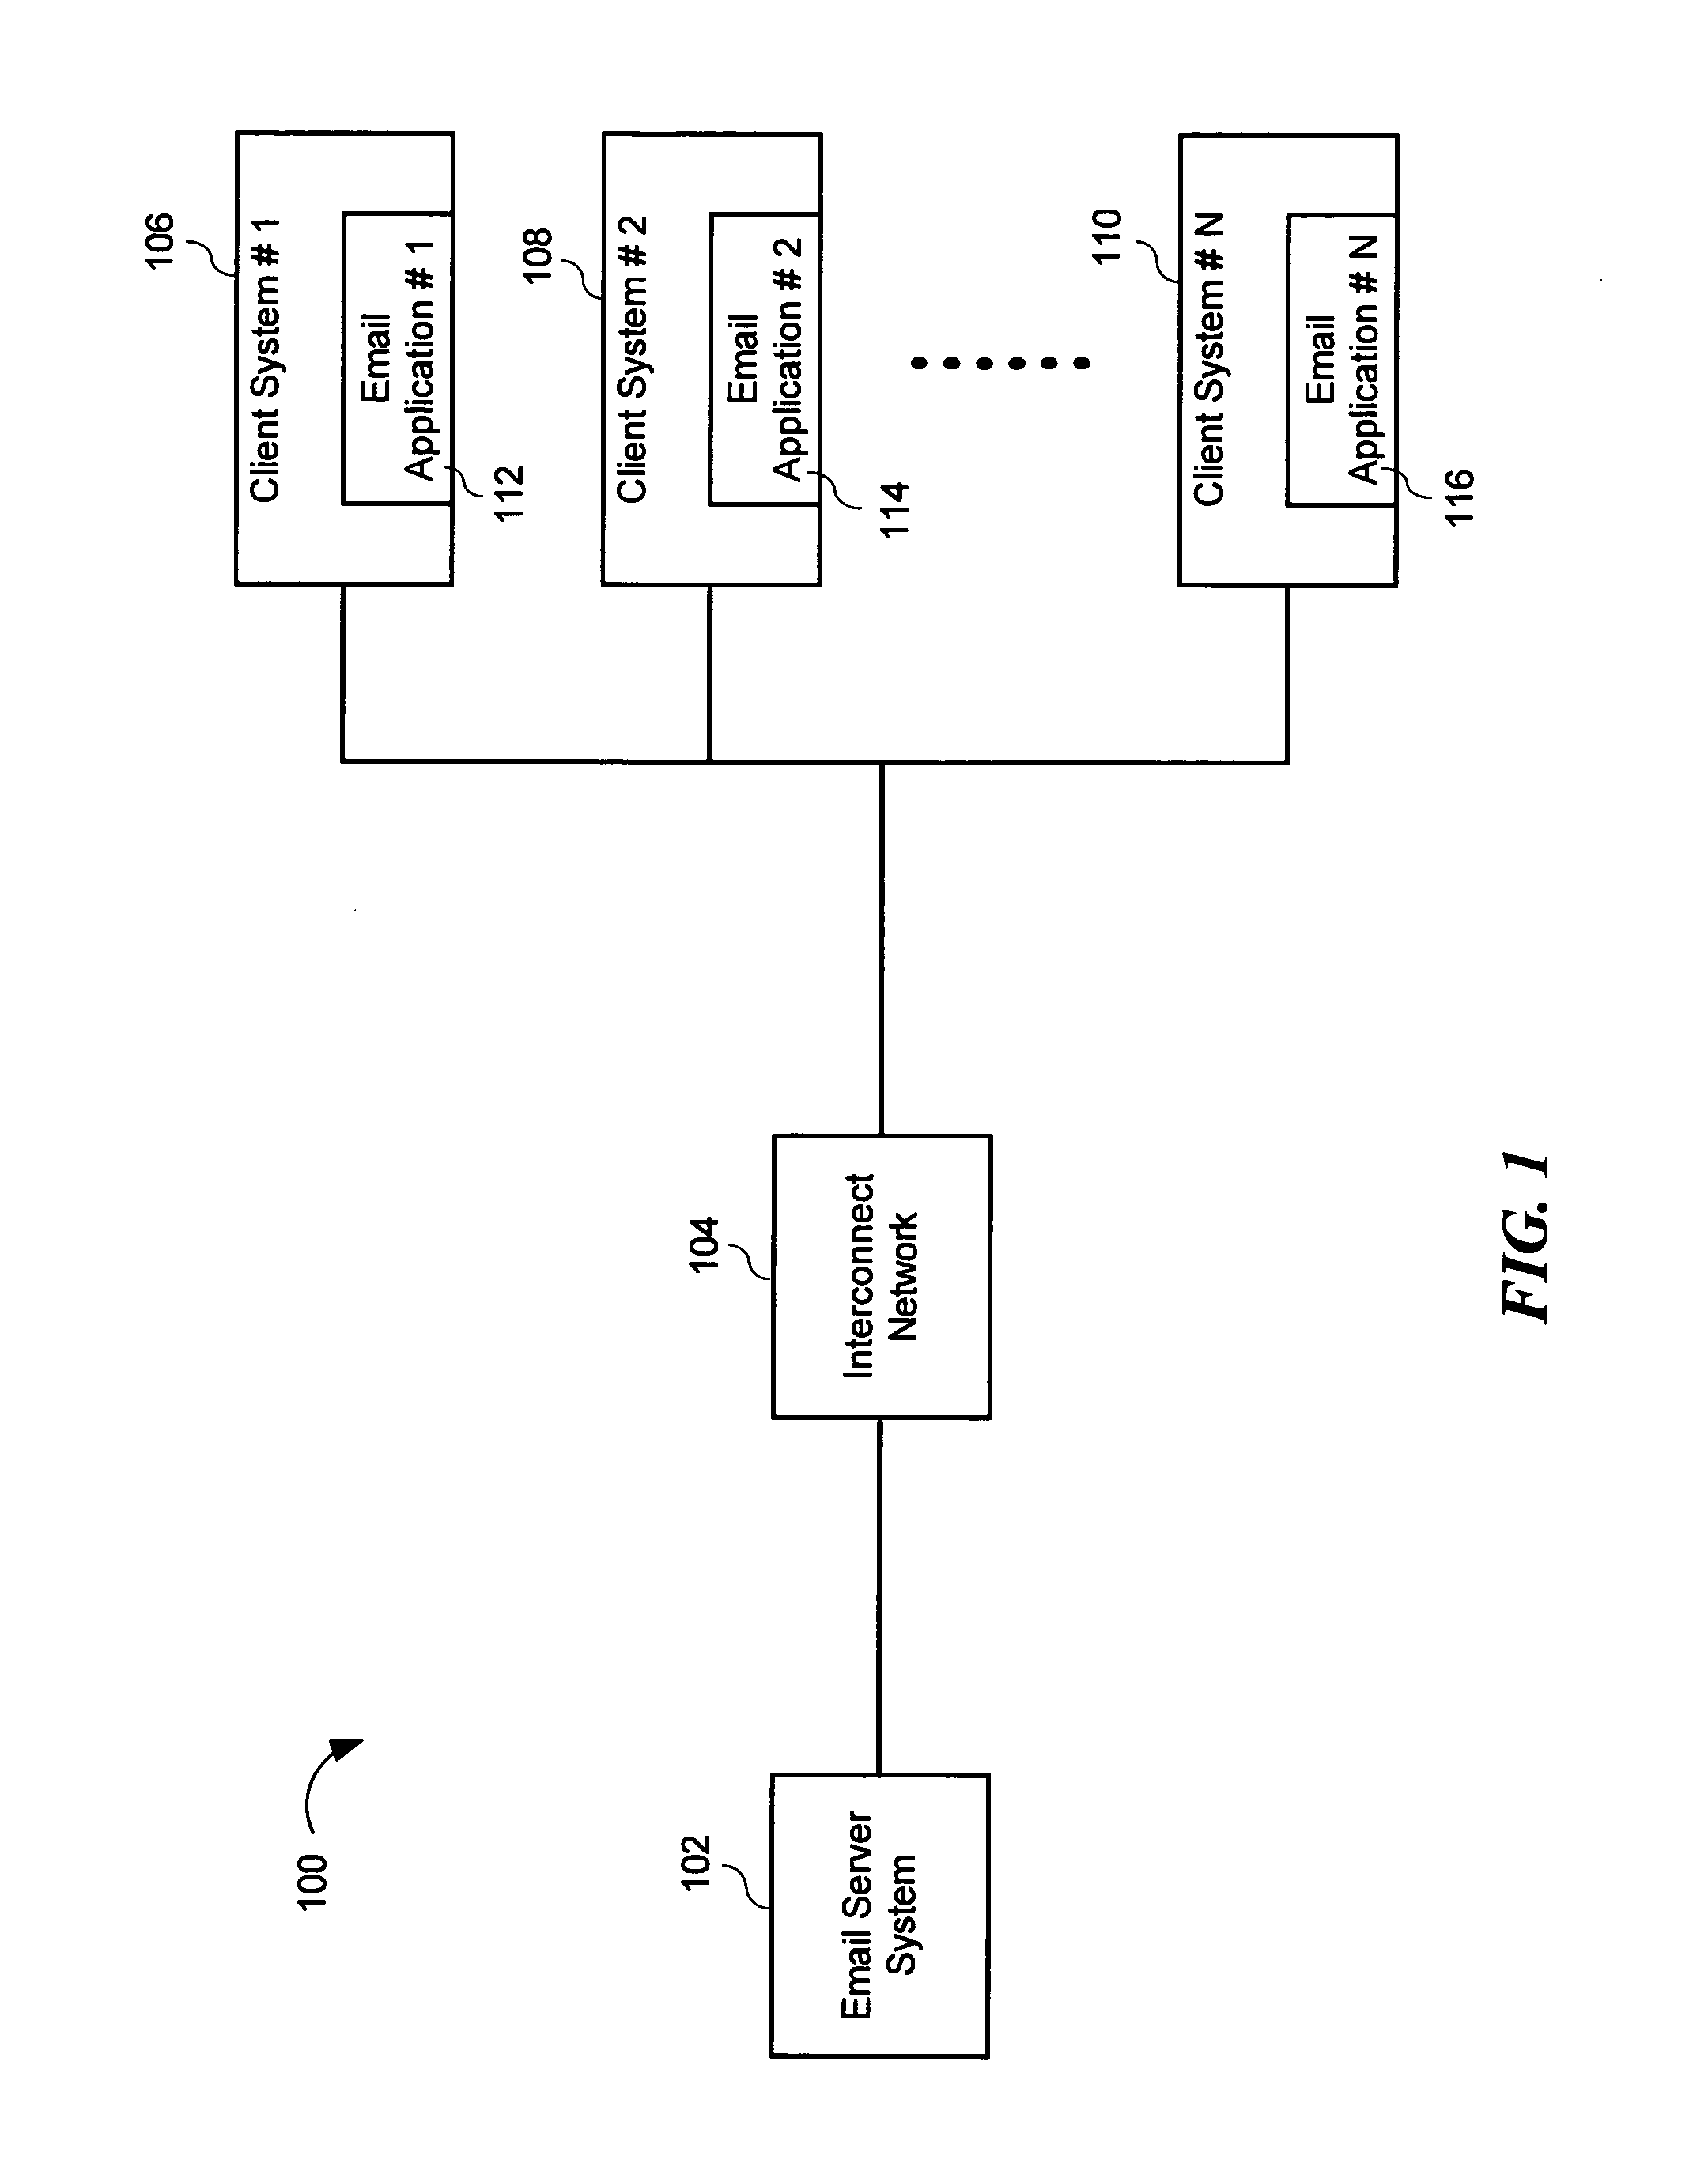 Method and system for restricting automatic out-of-office email response to configured zone